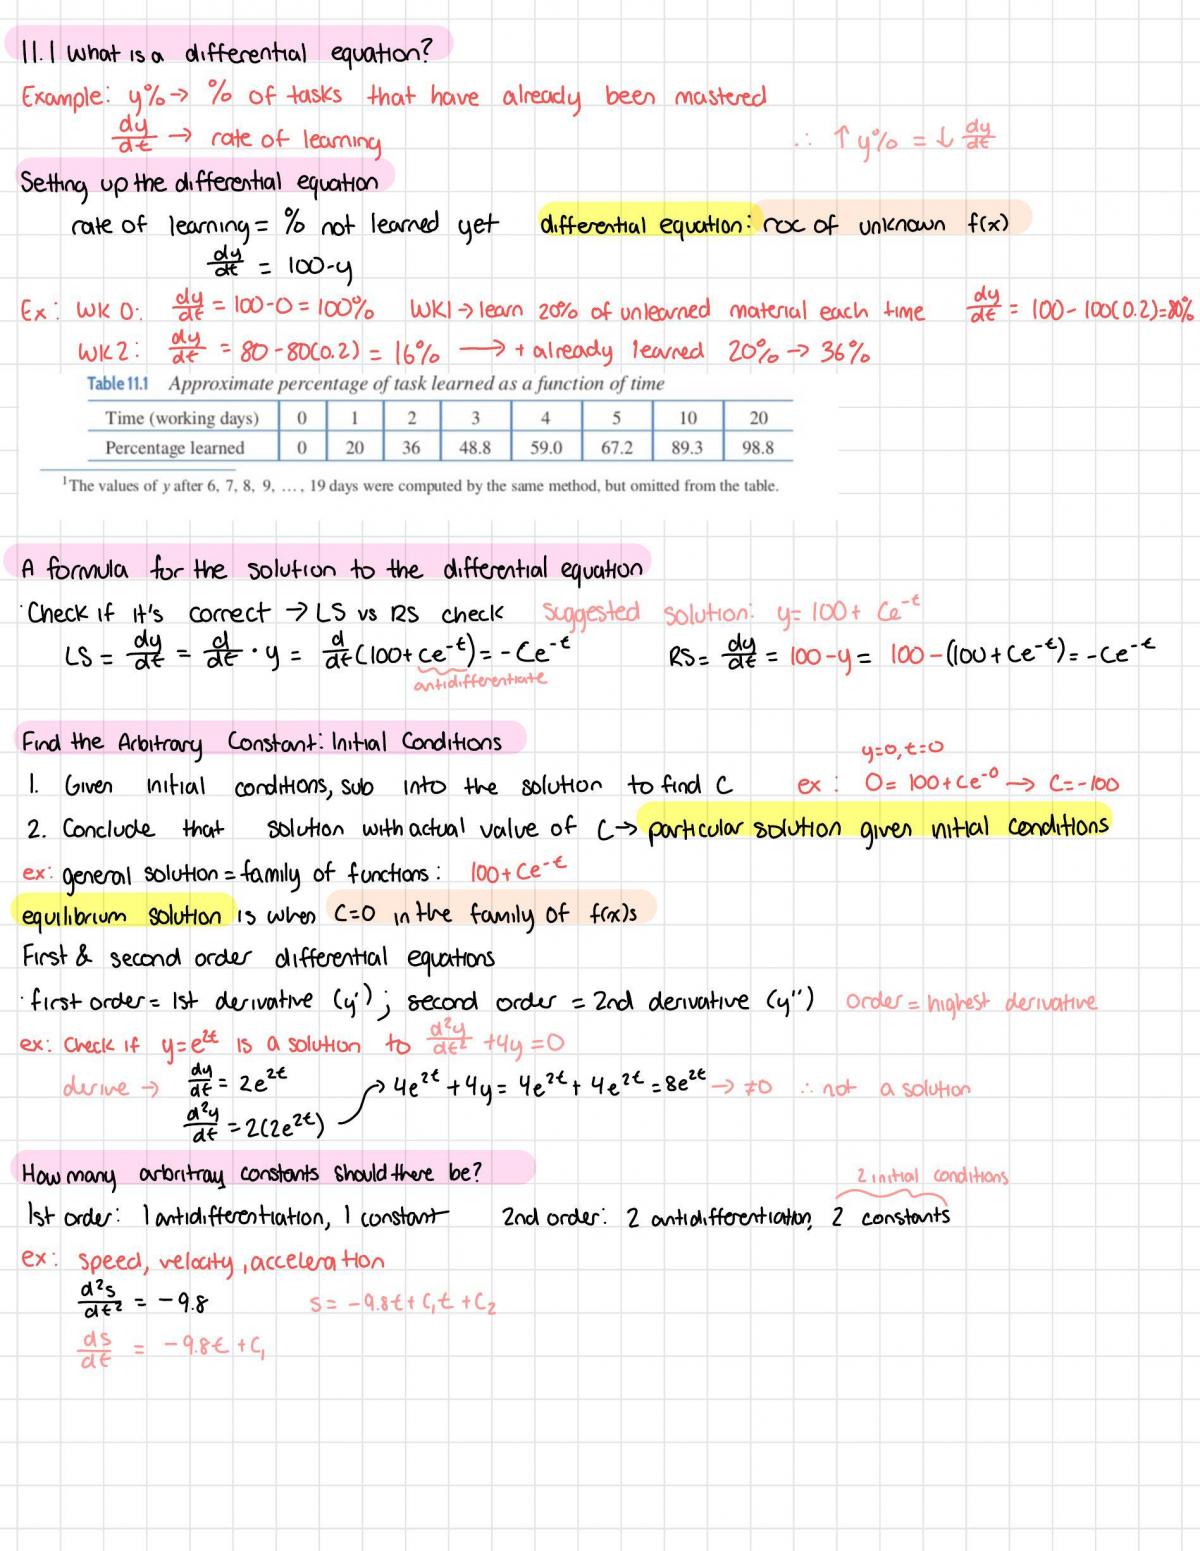 Calculus II Complete Study Notes - Page 15